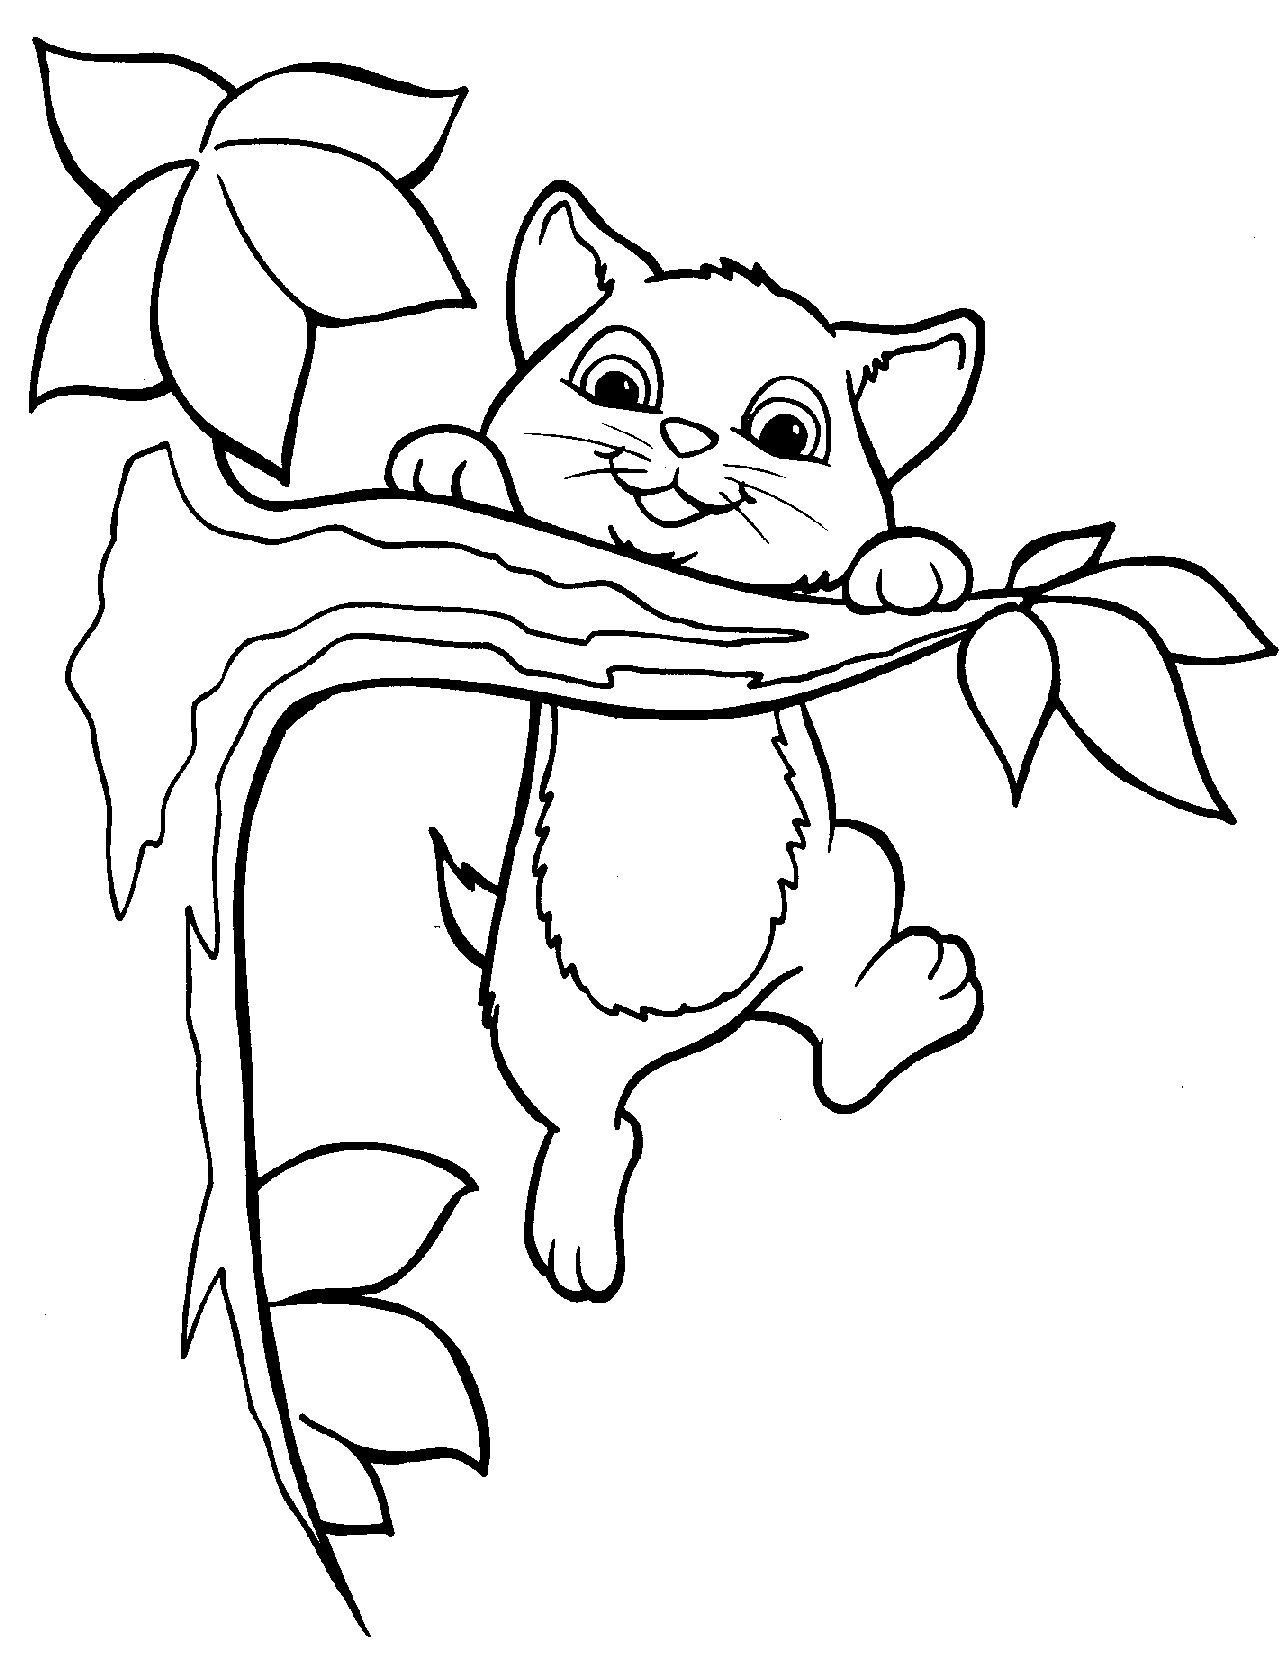 pictures of kittens to color kitty world kitten pictures to colour color pictures of kittens to 